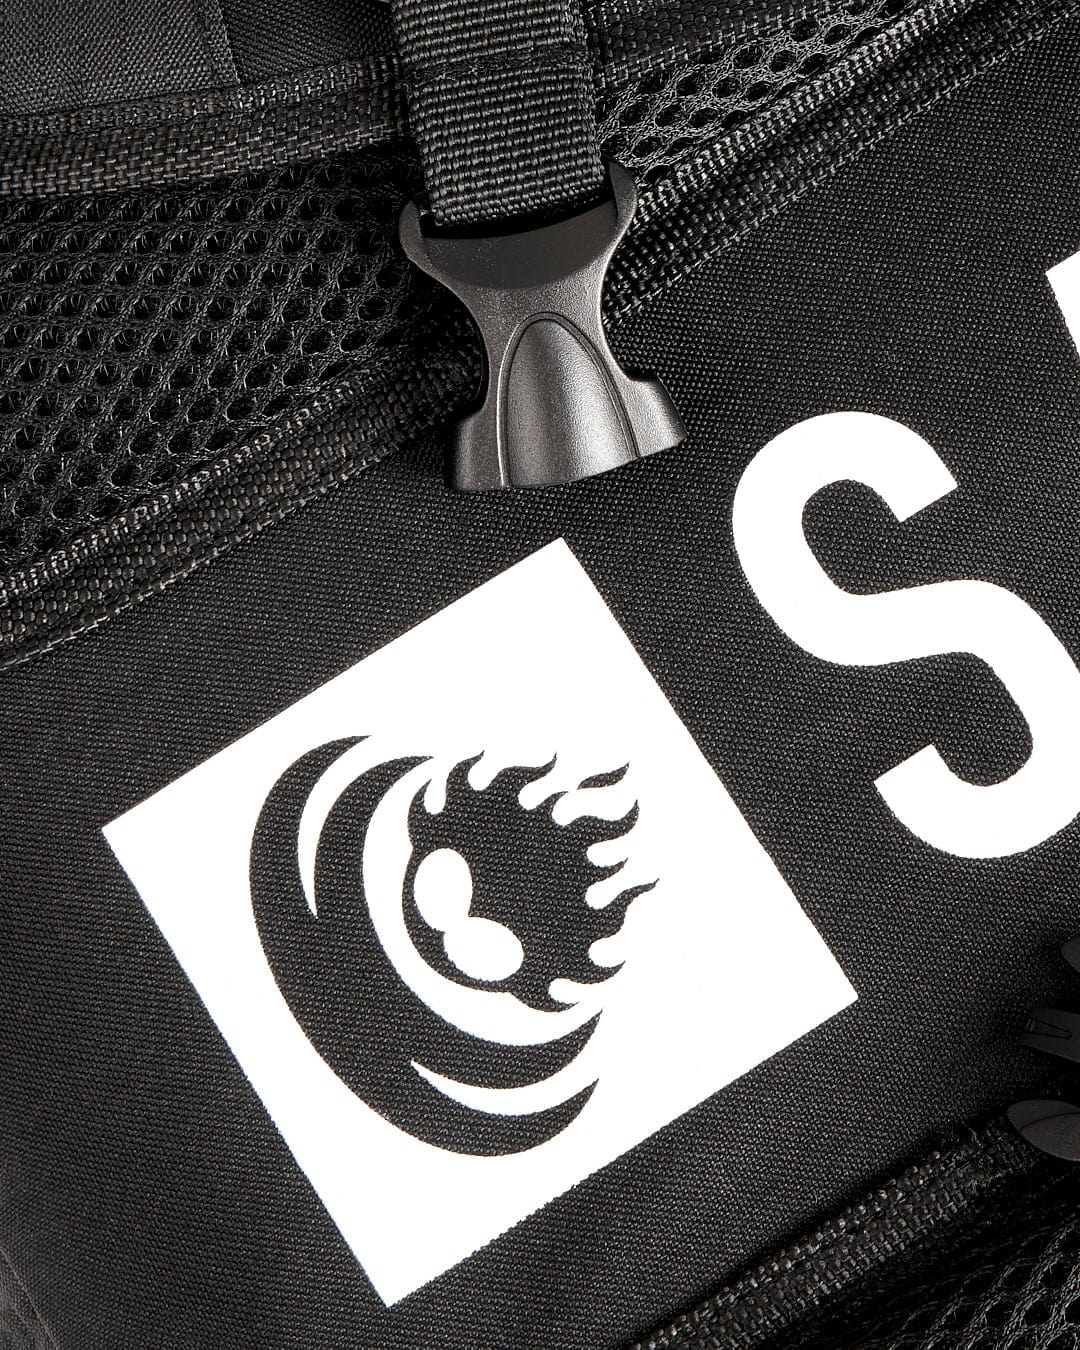 A close up of a Saltrock - Boardwalk Backpack - Black bag with a logo on it.